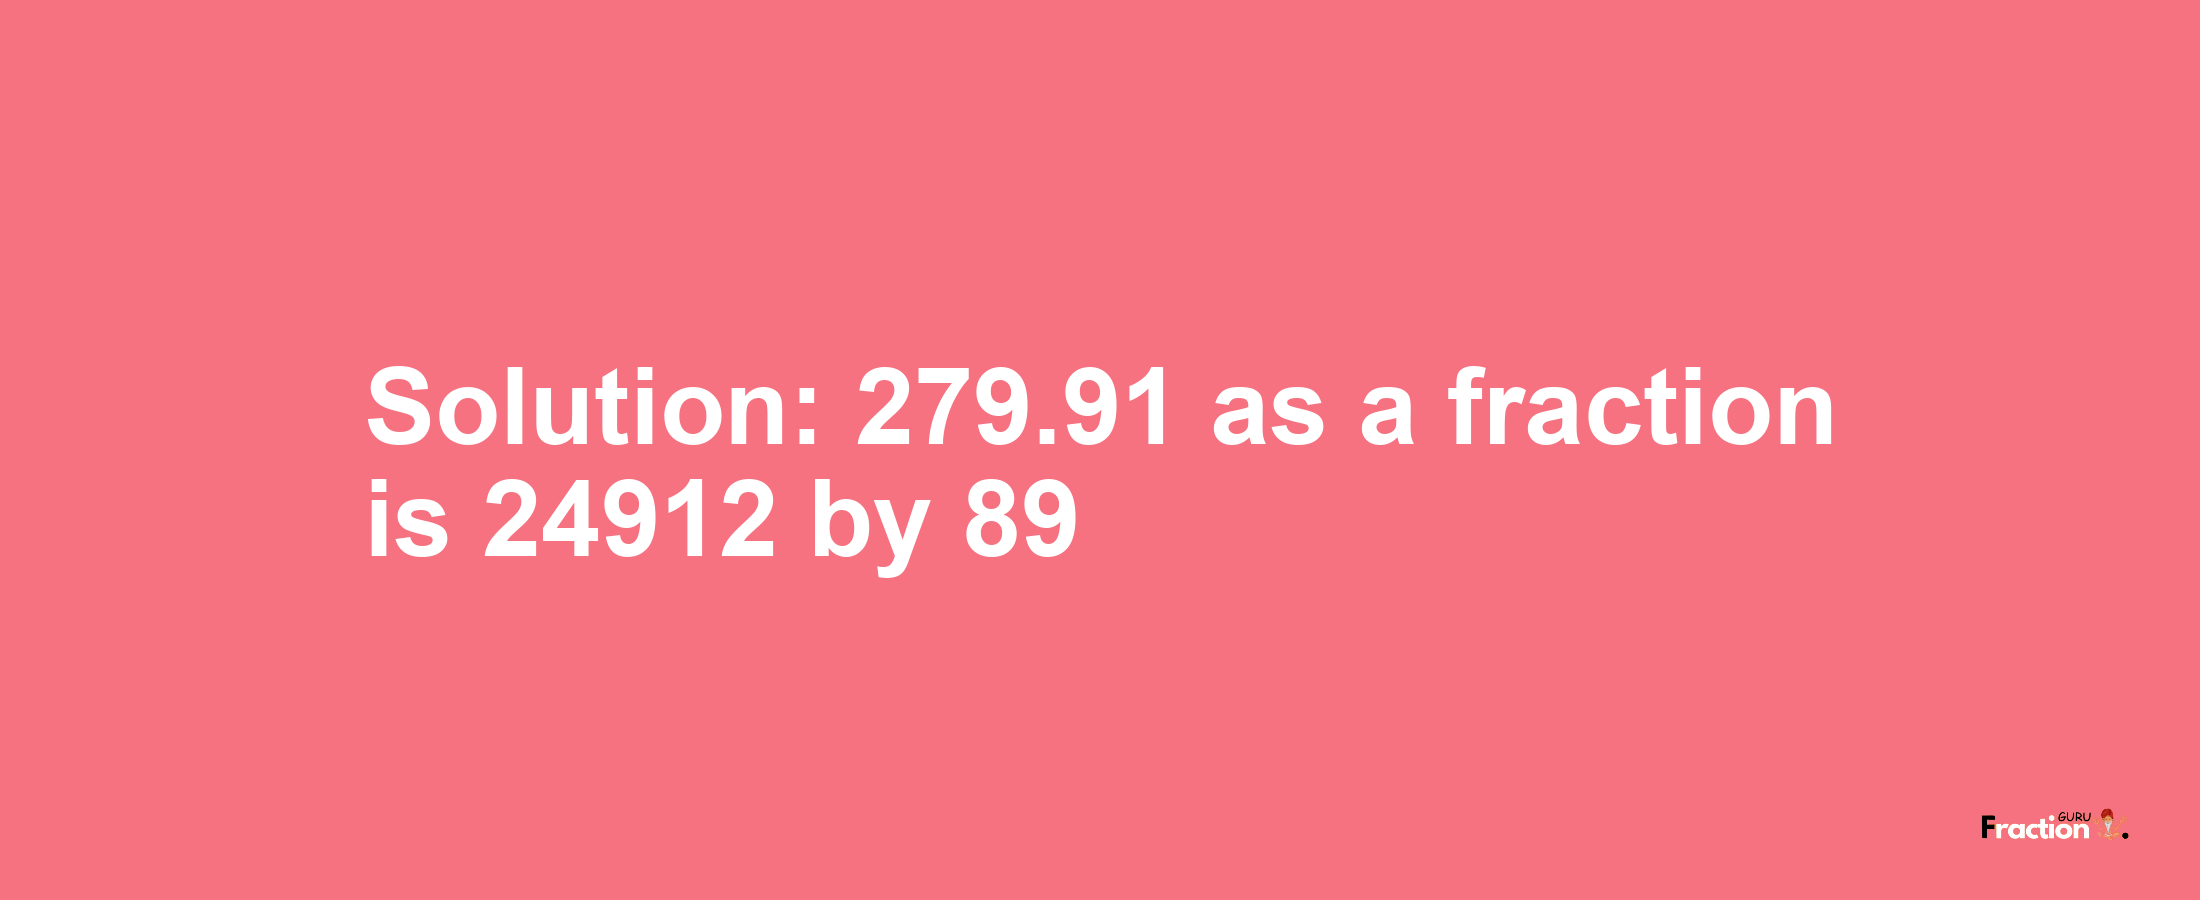 Solution:279.91 as a fraction is 24912/89